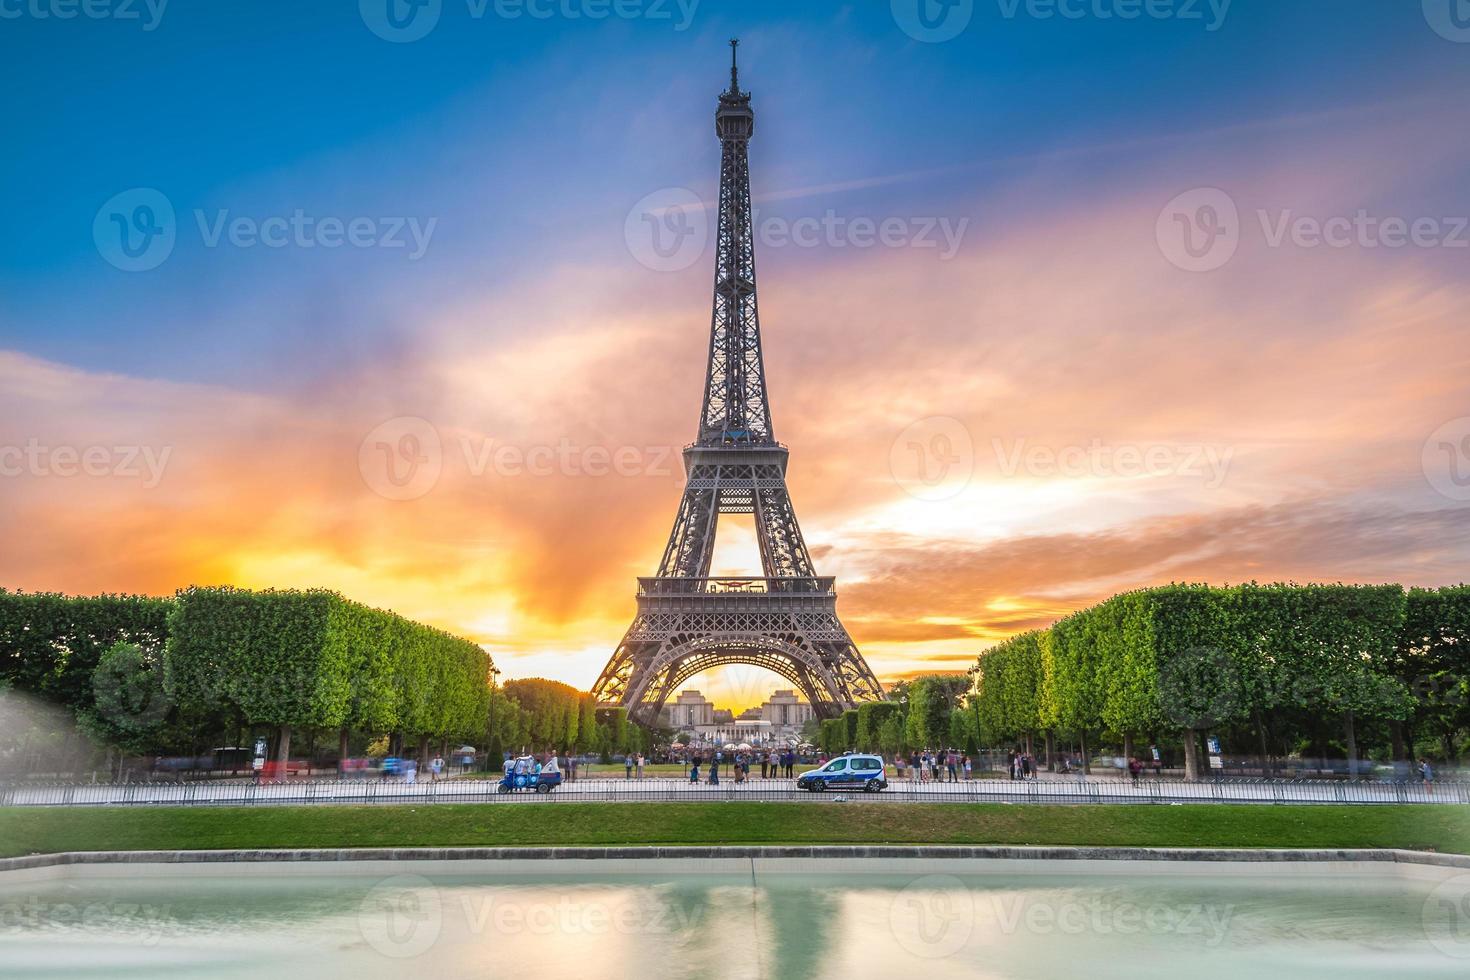 Eiffel Tower is the tallest structure in Paris, France photo